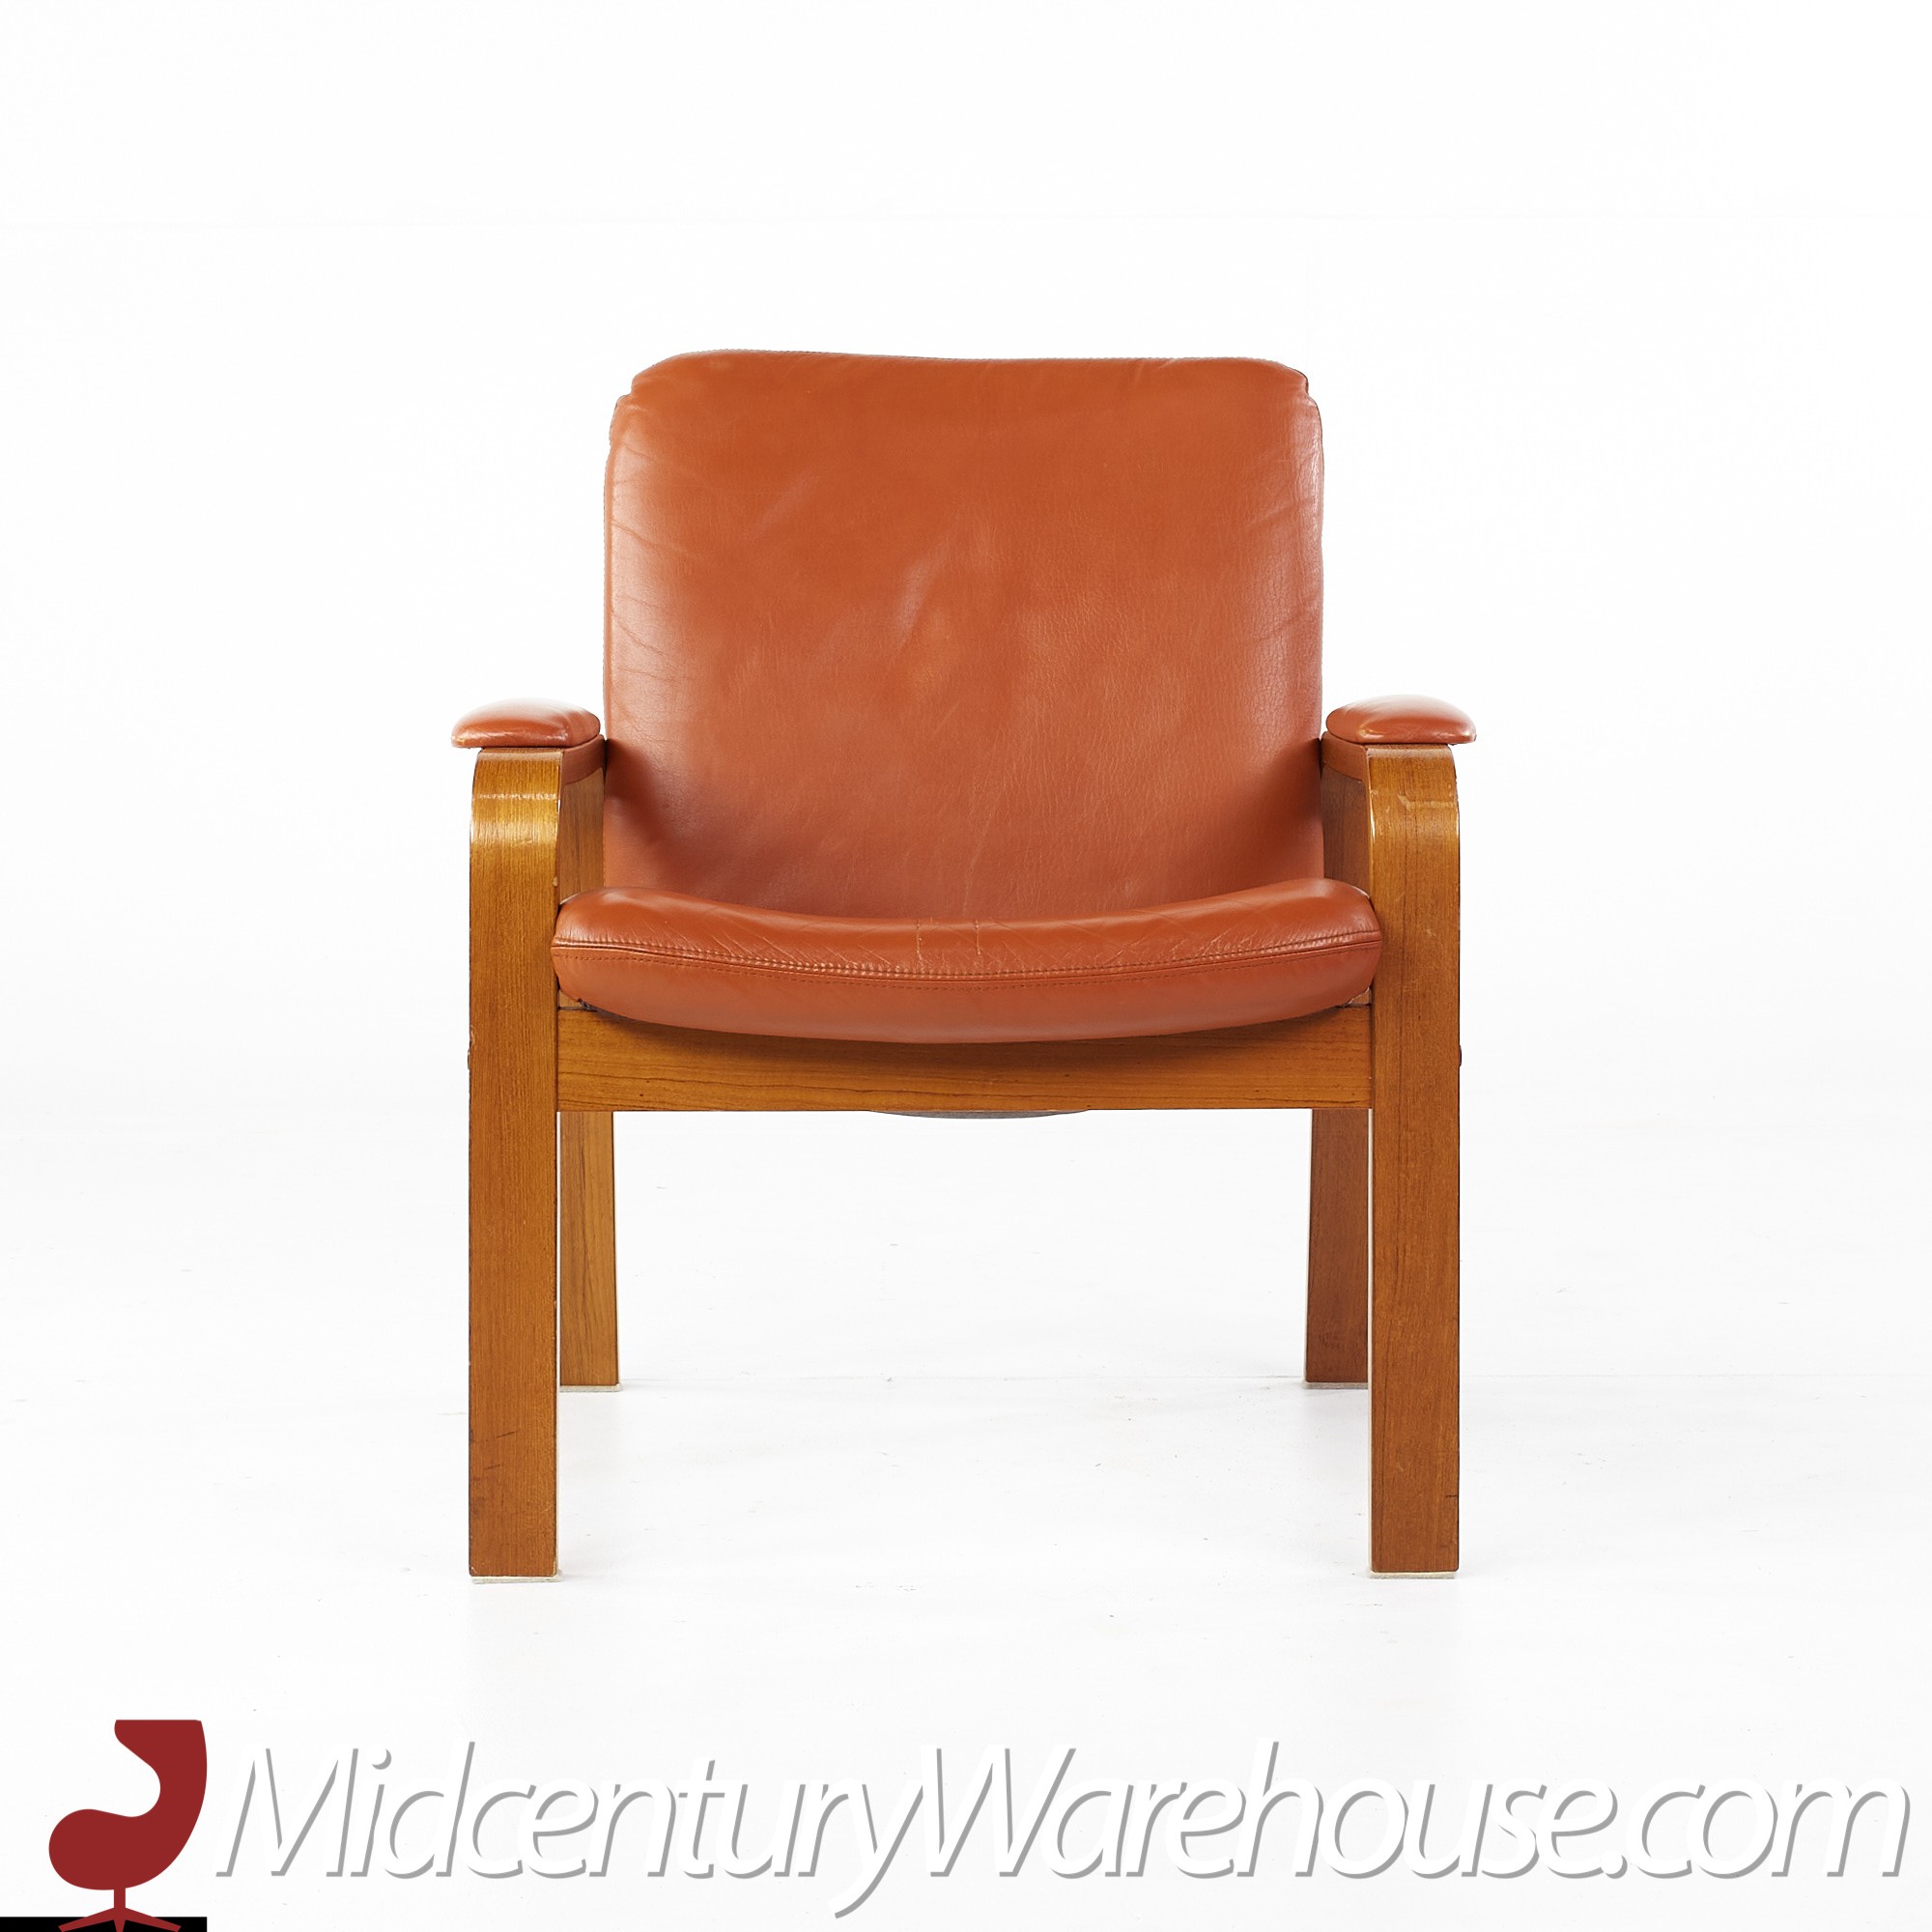 BELT Lounge Chair in Reclaimed Teak and Black Leather